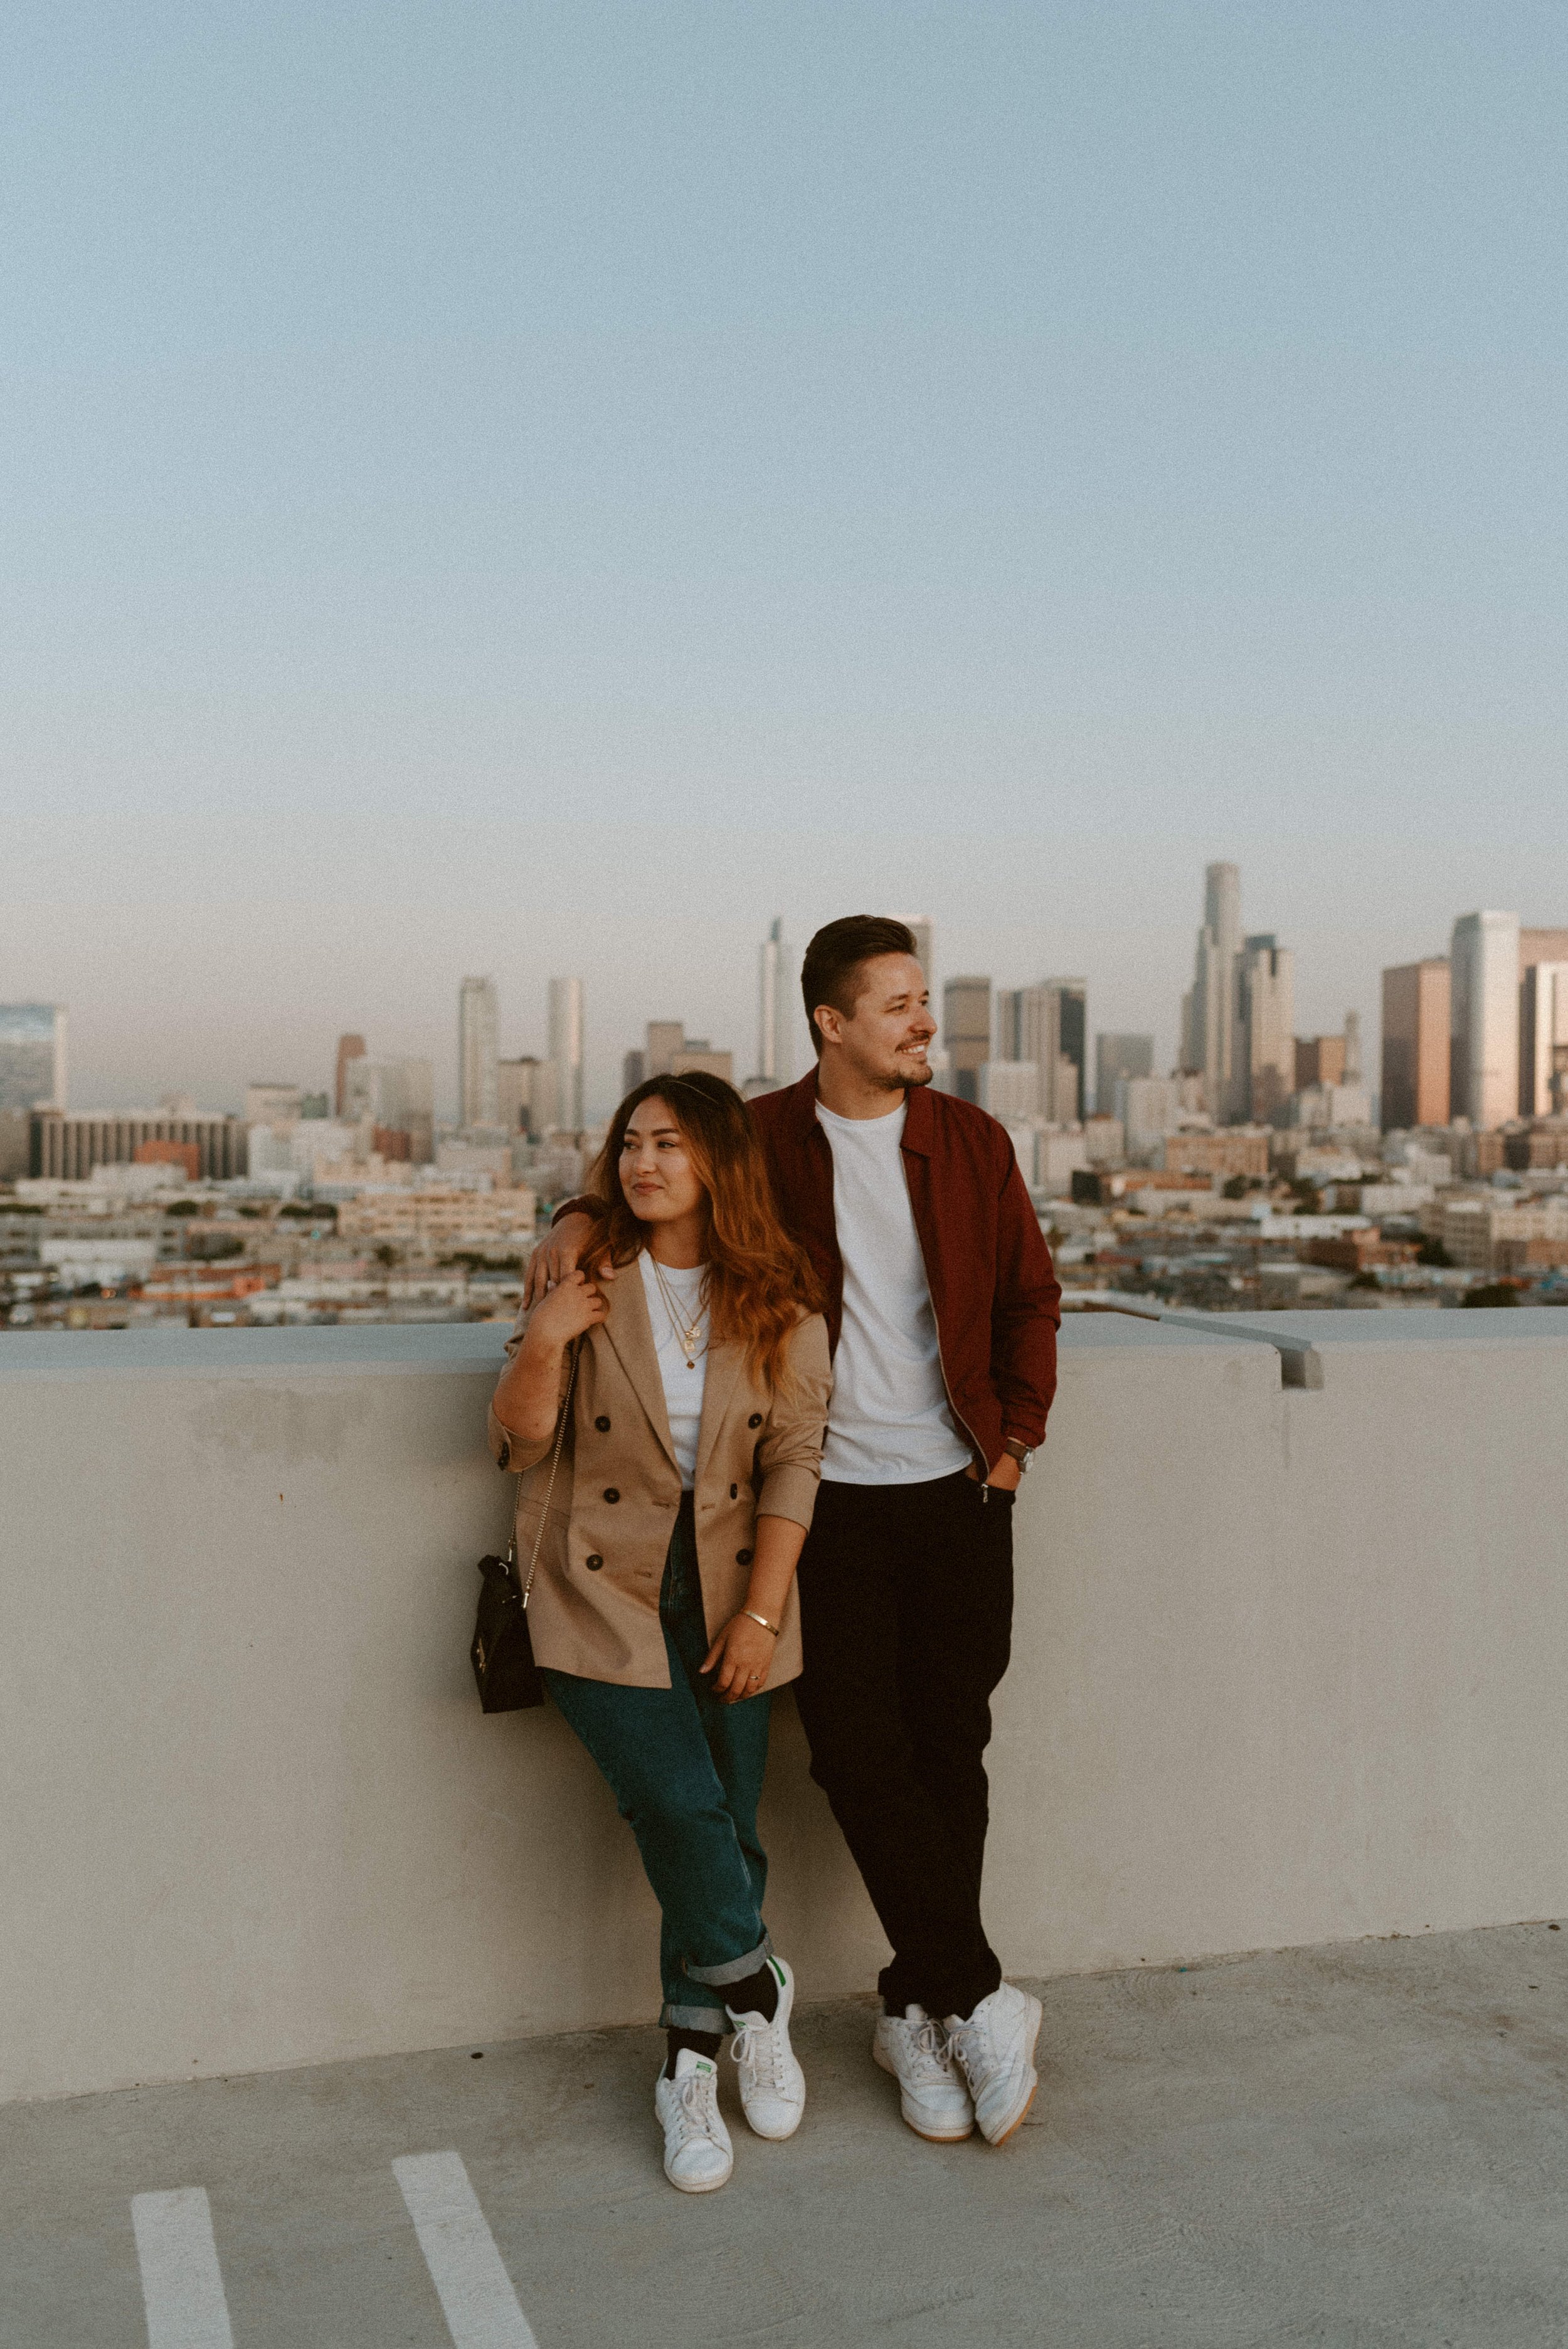 Best Engagement Session Locations in Southern California - Downtown Los Angeles | California Wedding Photographer